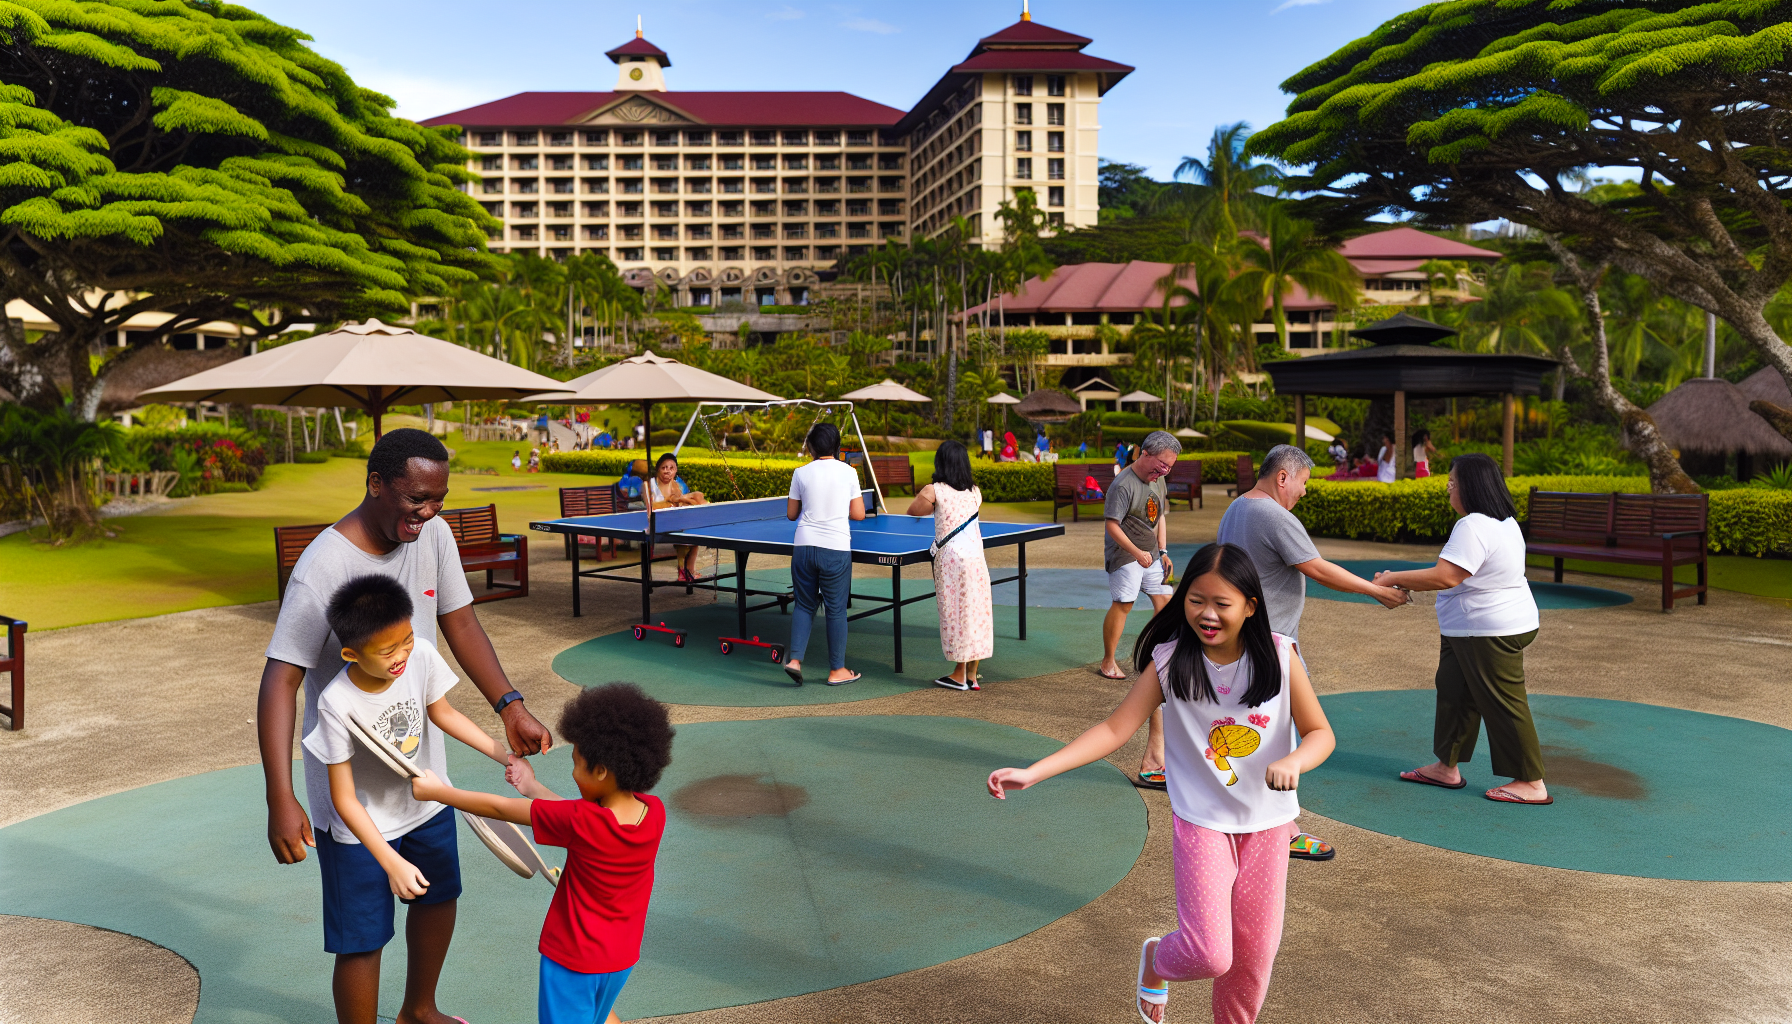 Family-friendly hotel outdoor activities